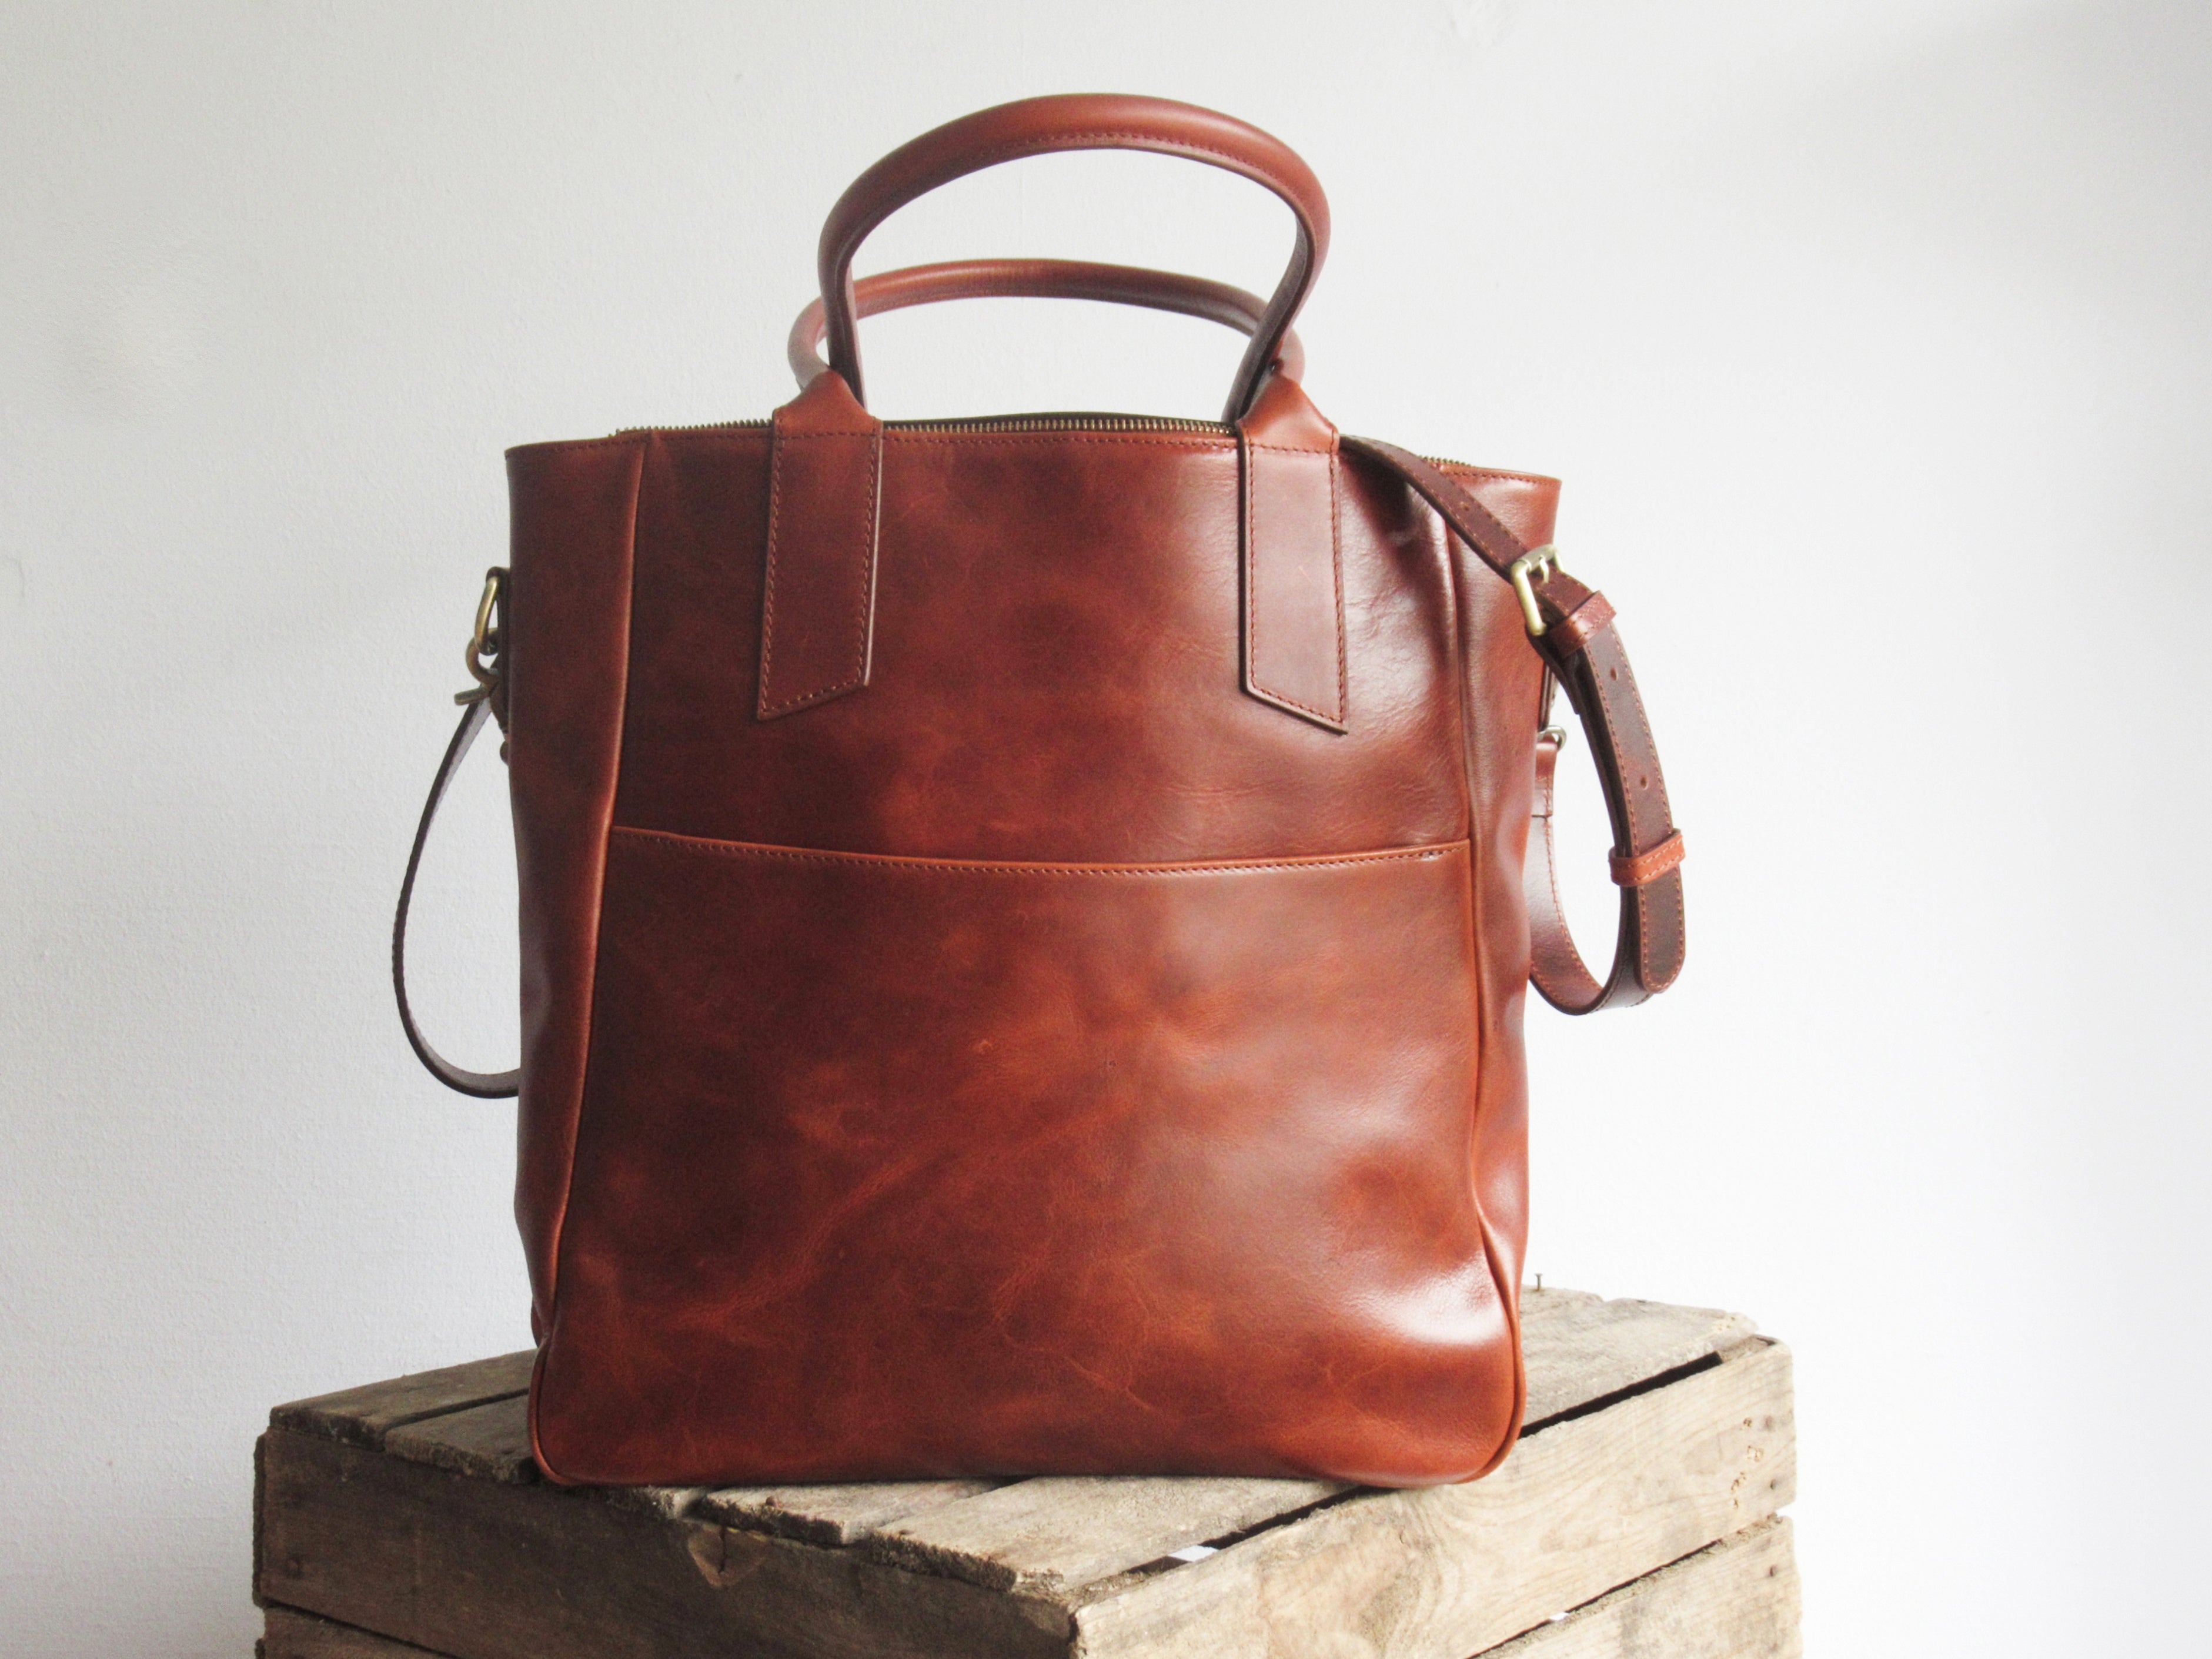 Cognac Leather Tote